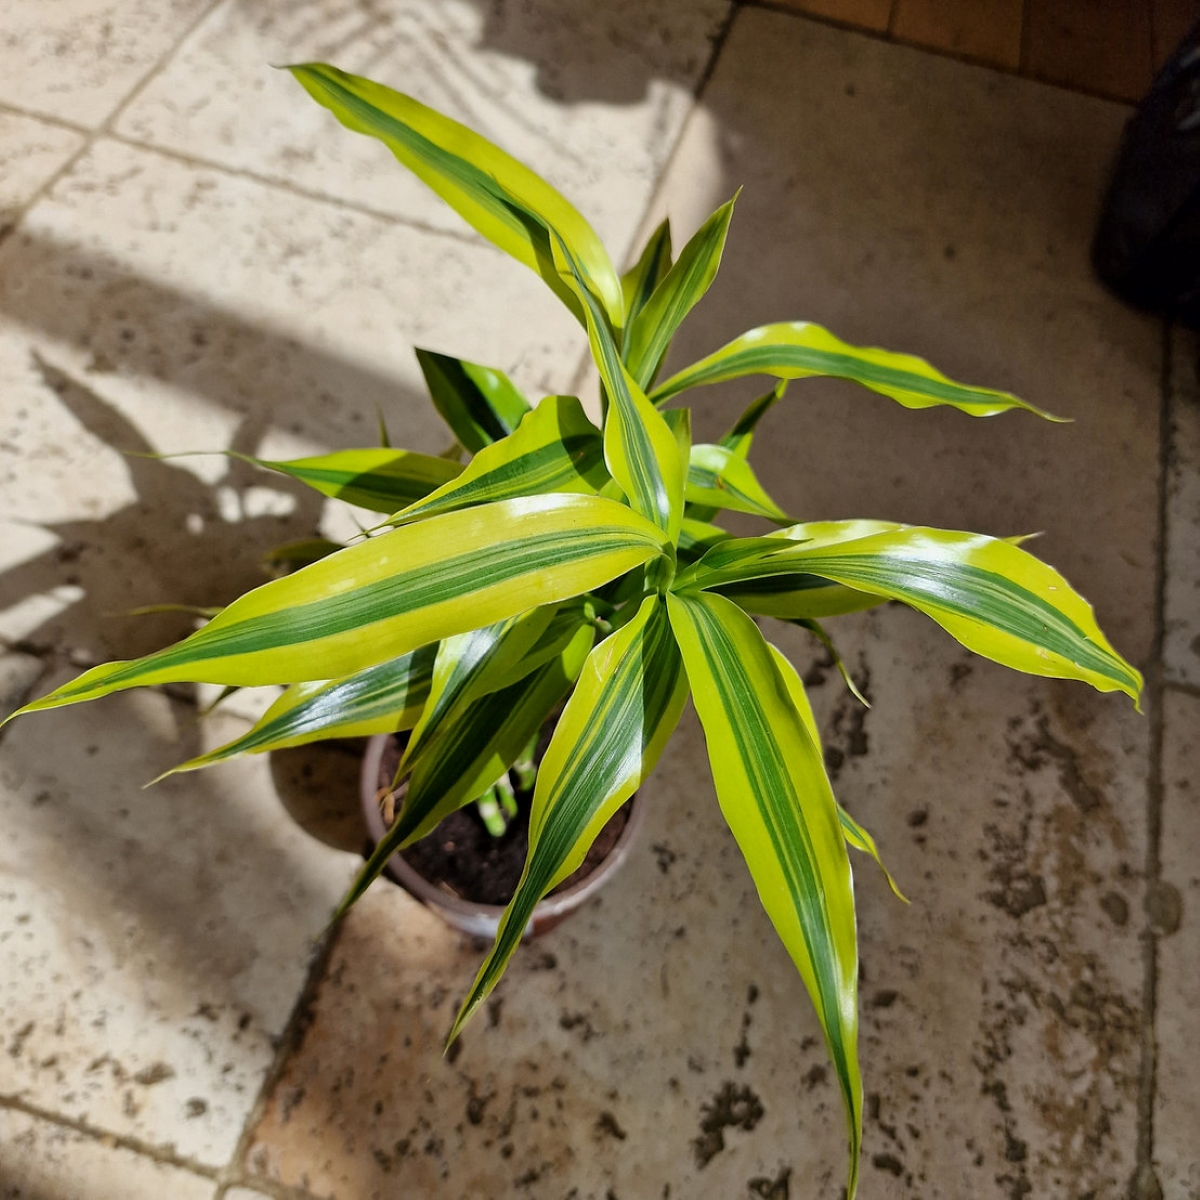 Dracaena plant with bright lemon lime colored leaves